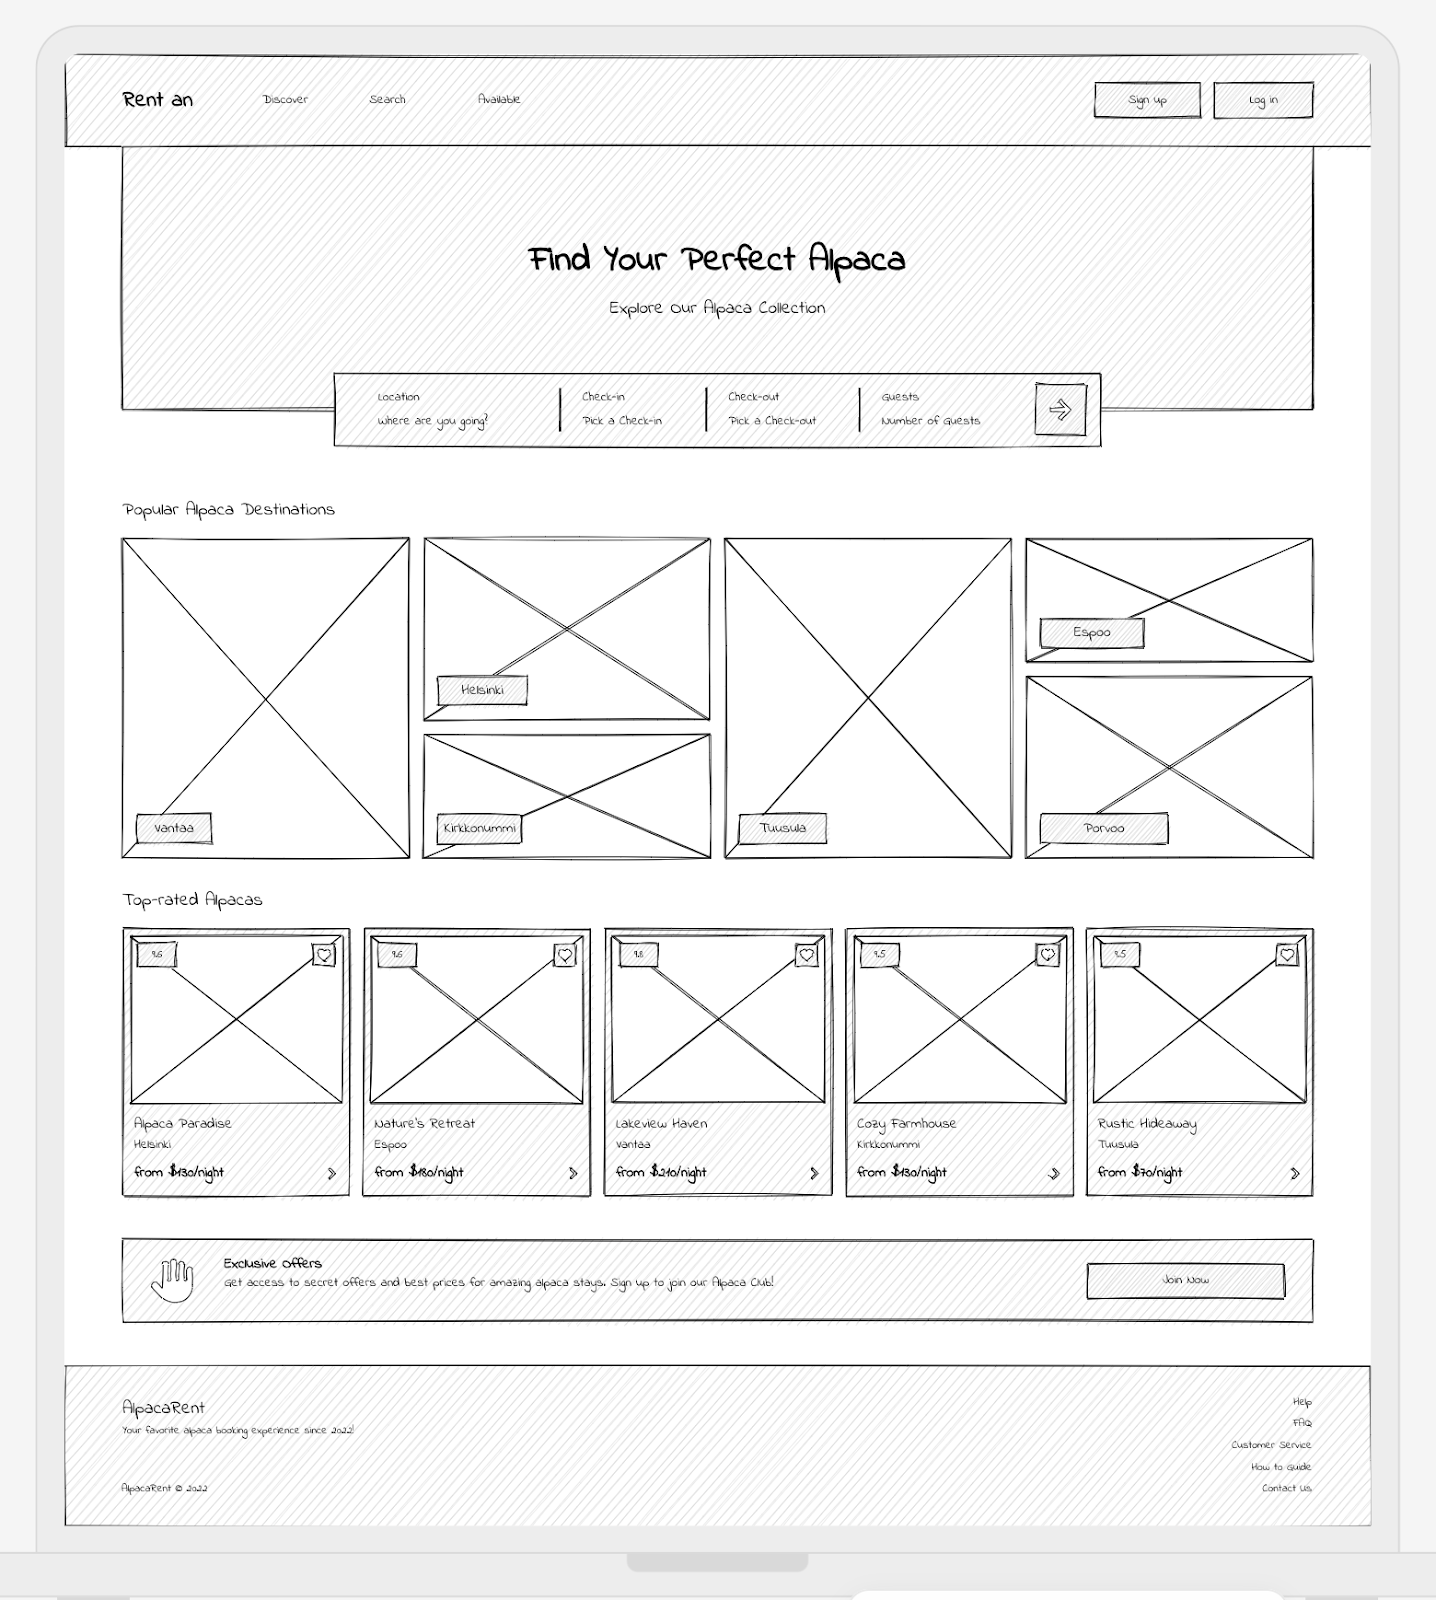 The wireframe created by UIzard for our Alpaca booking service.